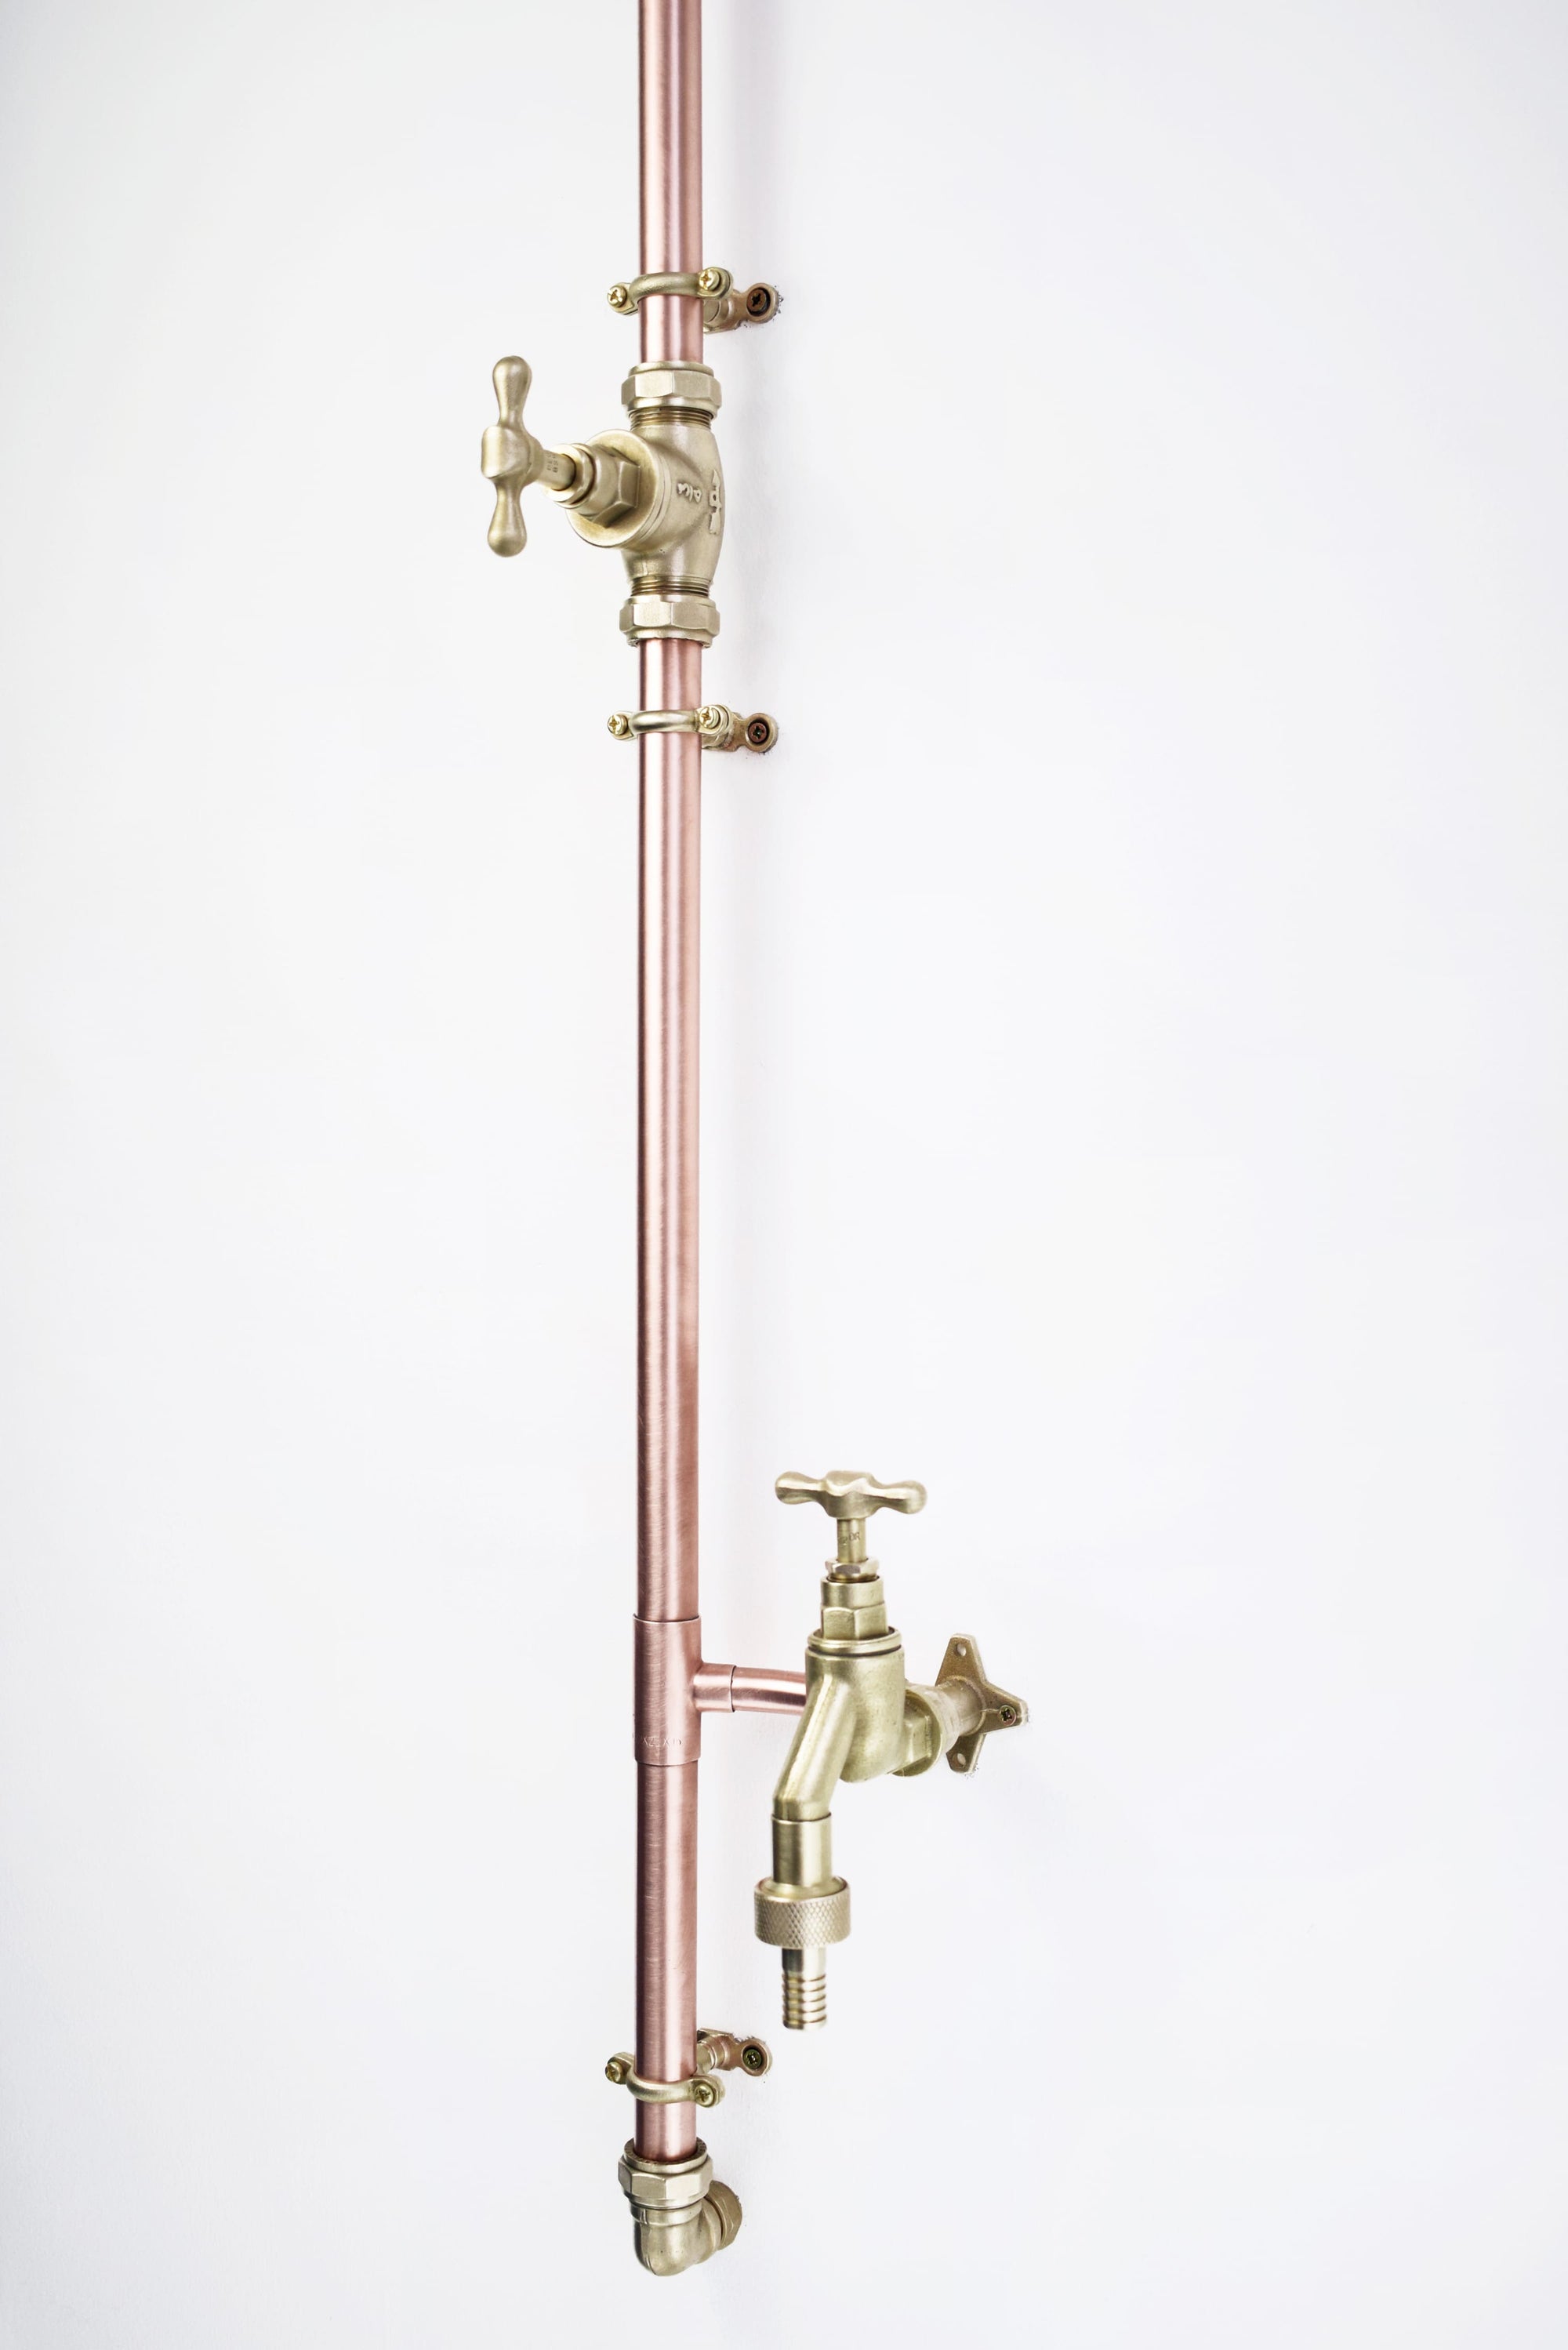 garden tap attachment featured on a copper shower perfect for an outdoor living space